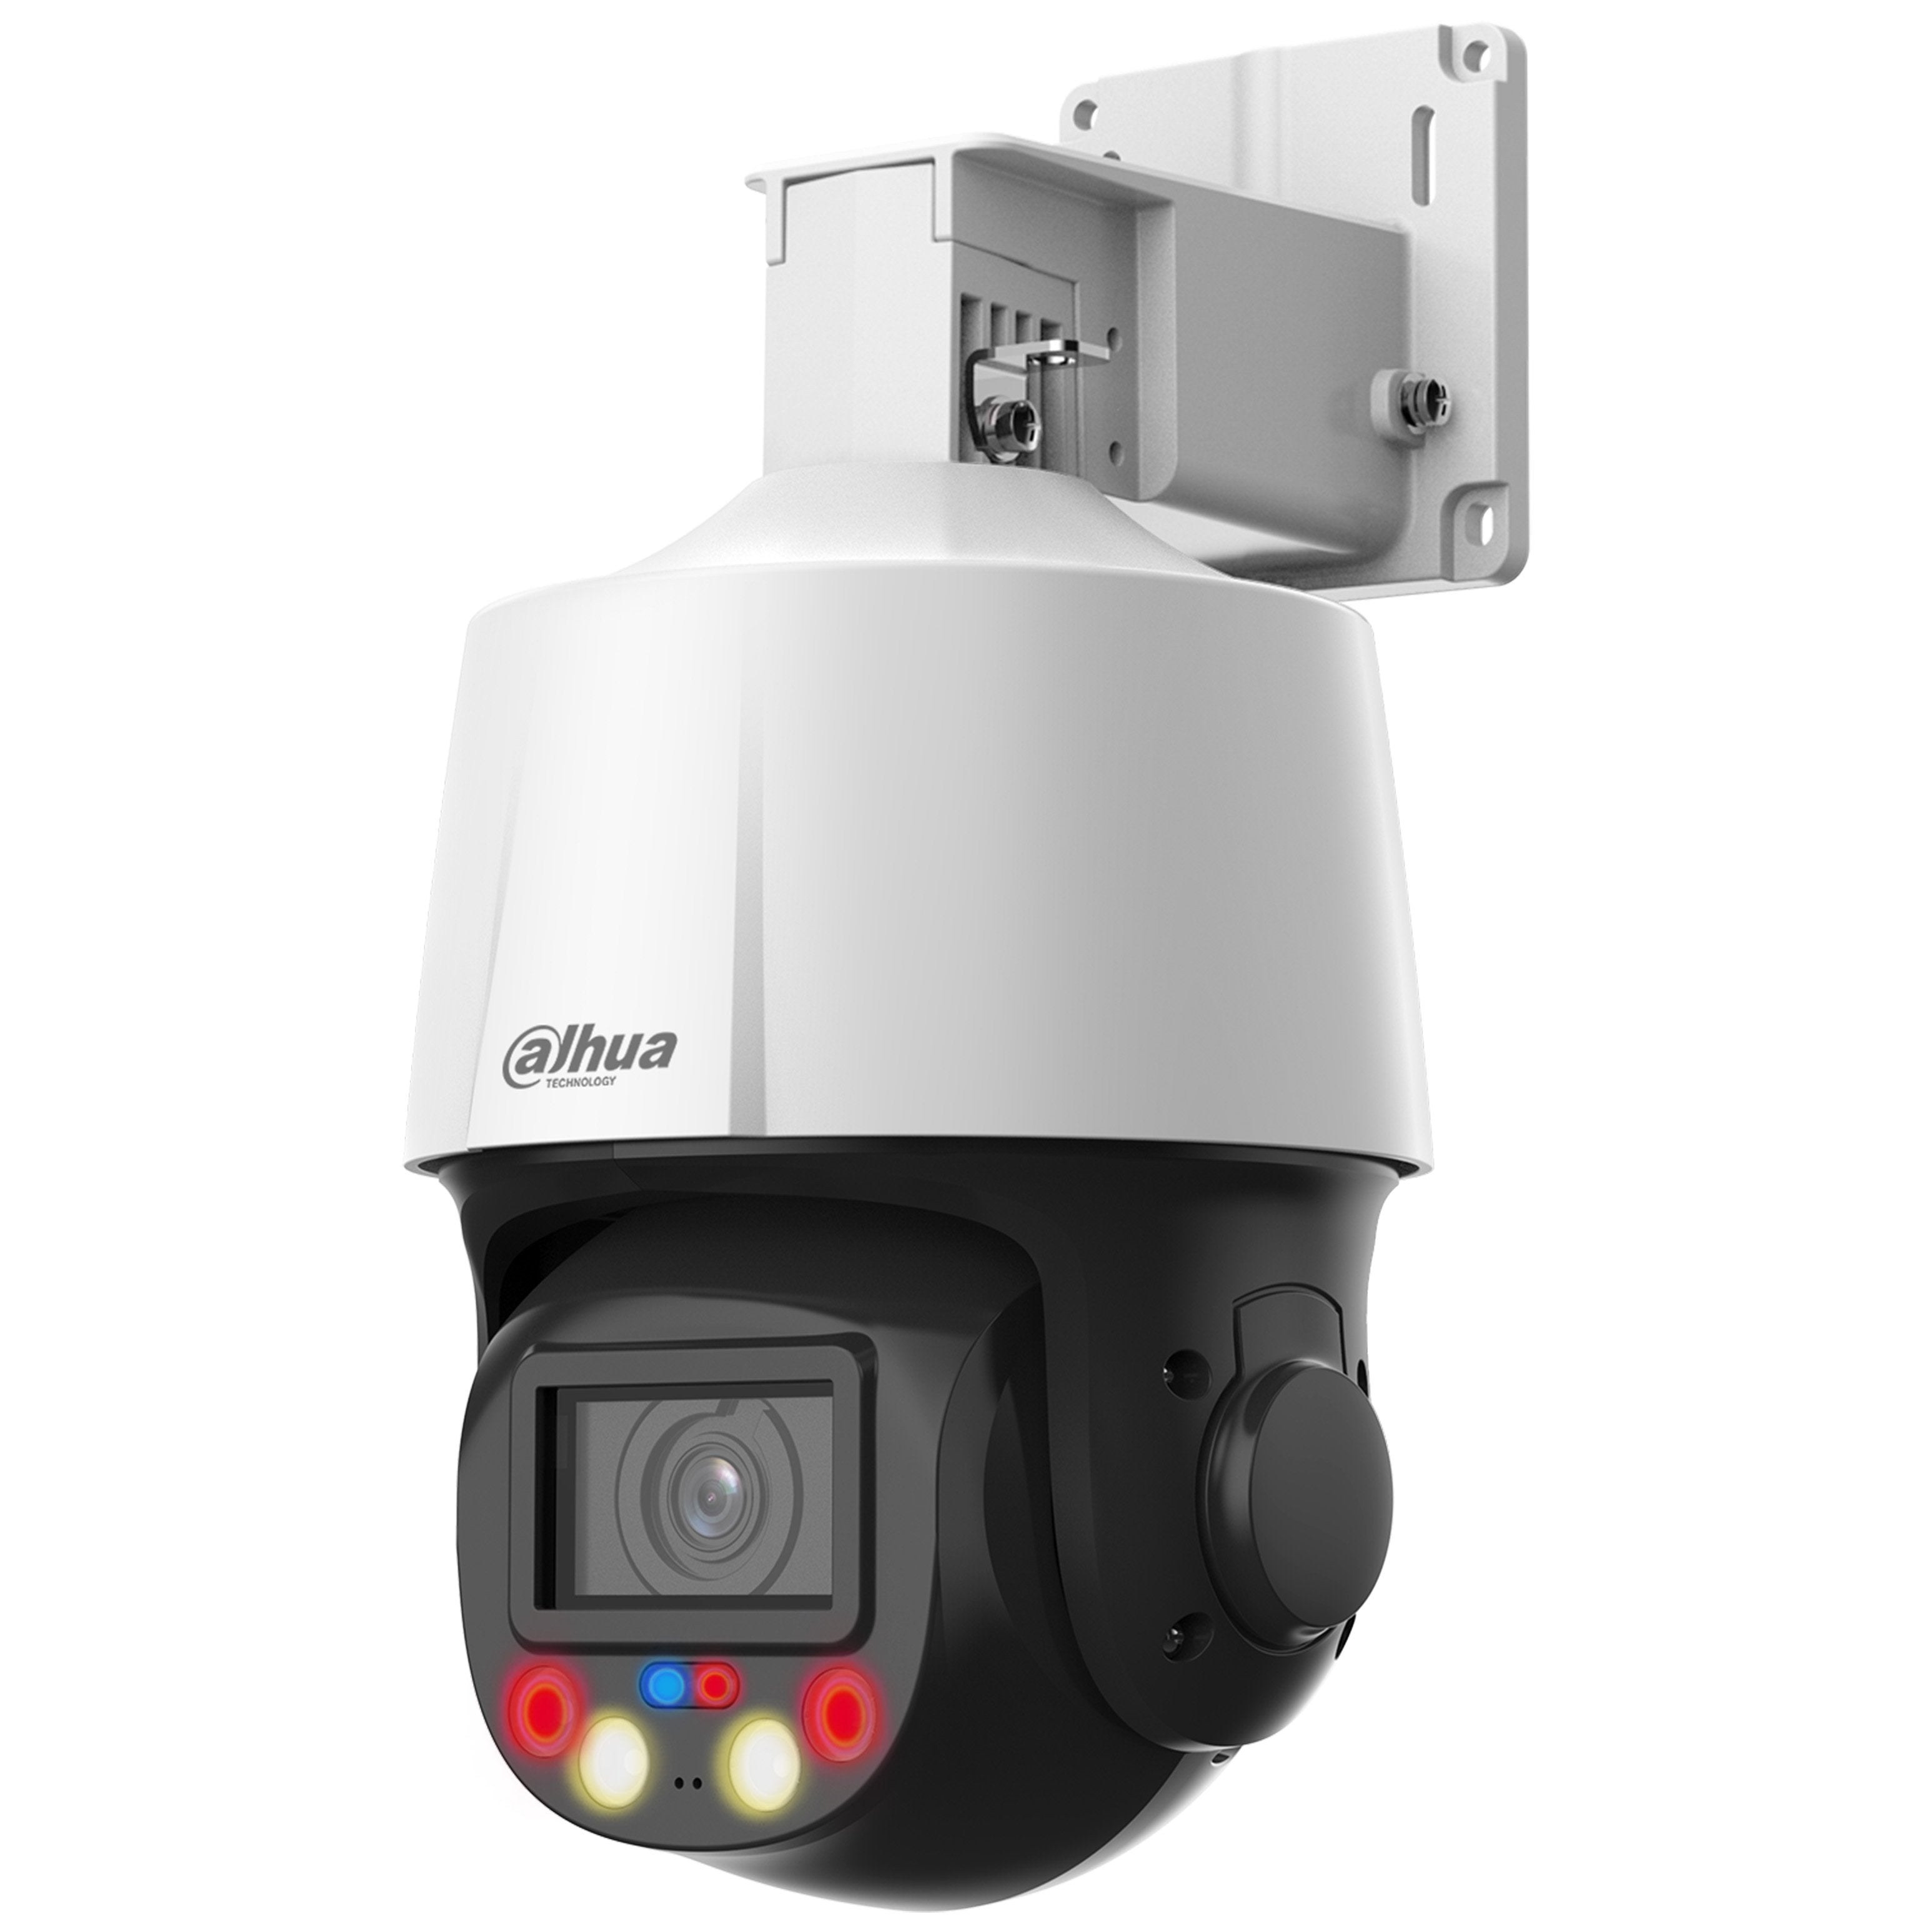 Dahua 4MP IP WizSense AI Series Full Colour Active Deterrence TiOC IR 5x PTZ, SMD 3.0, Perimeter, Face Detection, Auto-Tracking, 2.7-13.5mm, 120dB WDR, 50m IR / 30m White Light, POE / 12VDC, IP66, MicroSD, Built-in Mic / Speaker, Red / Blue Lights (Juncti